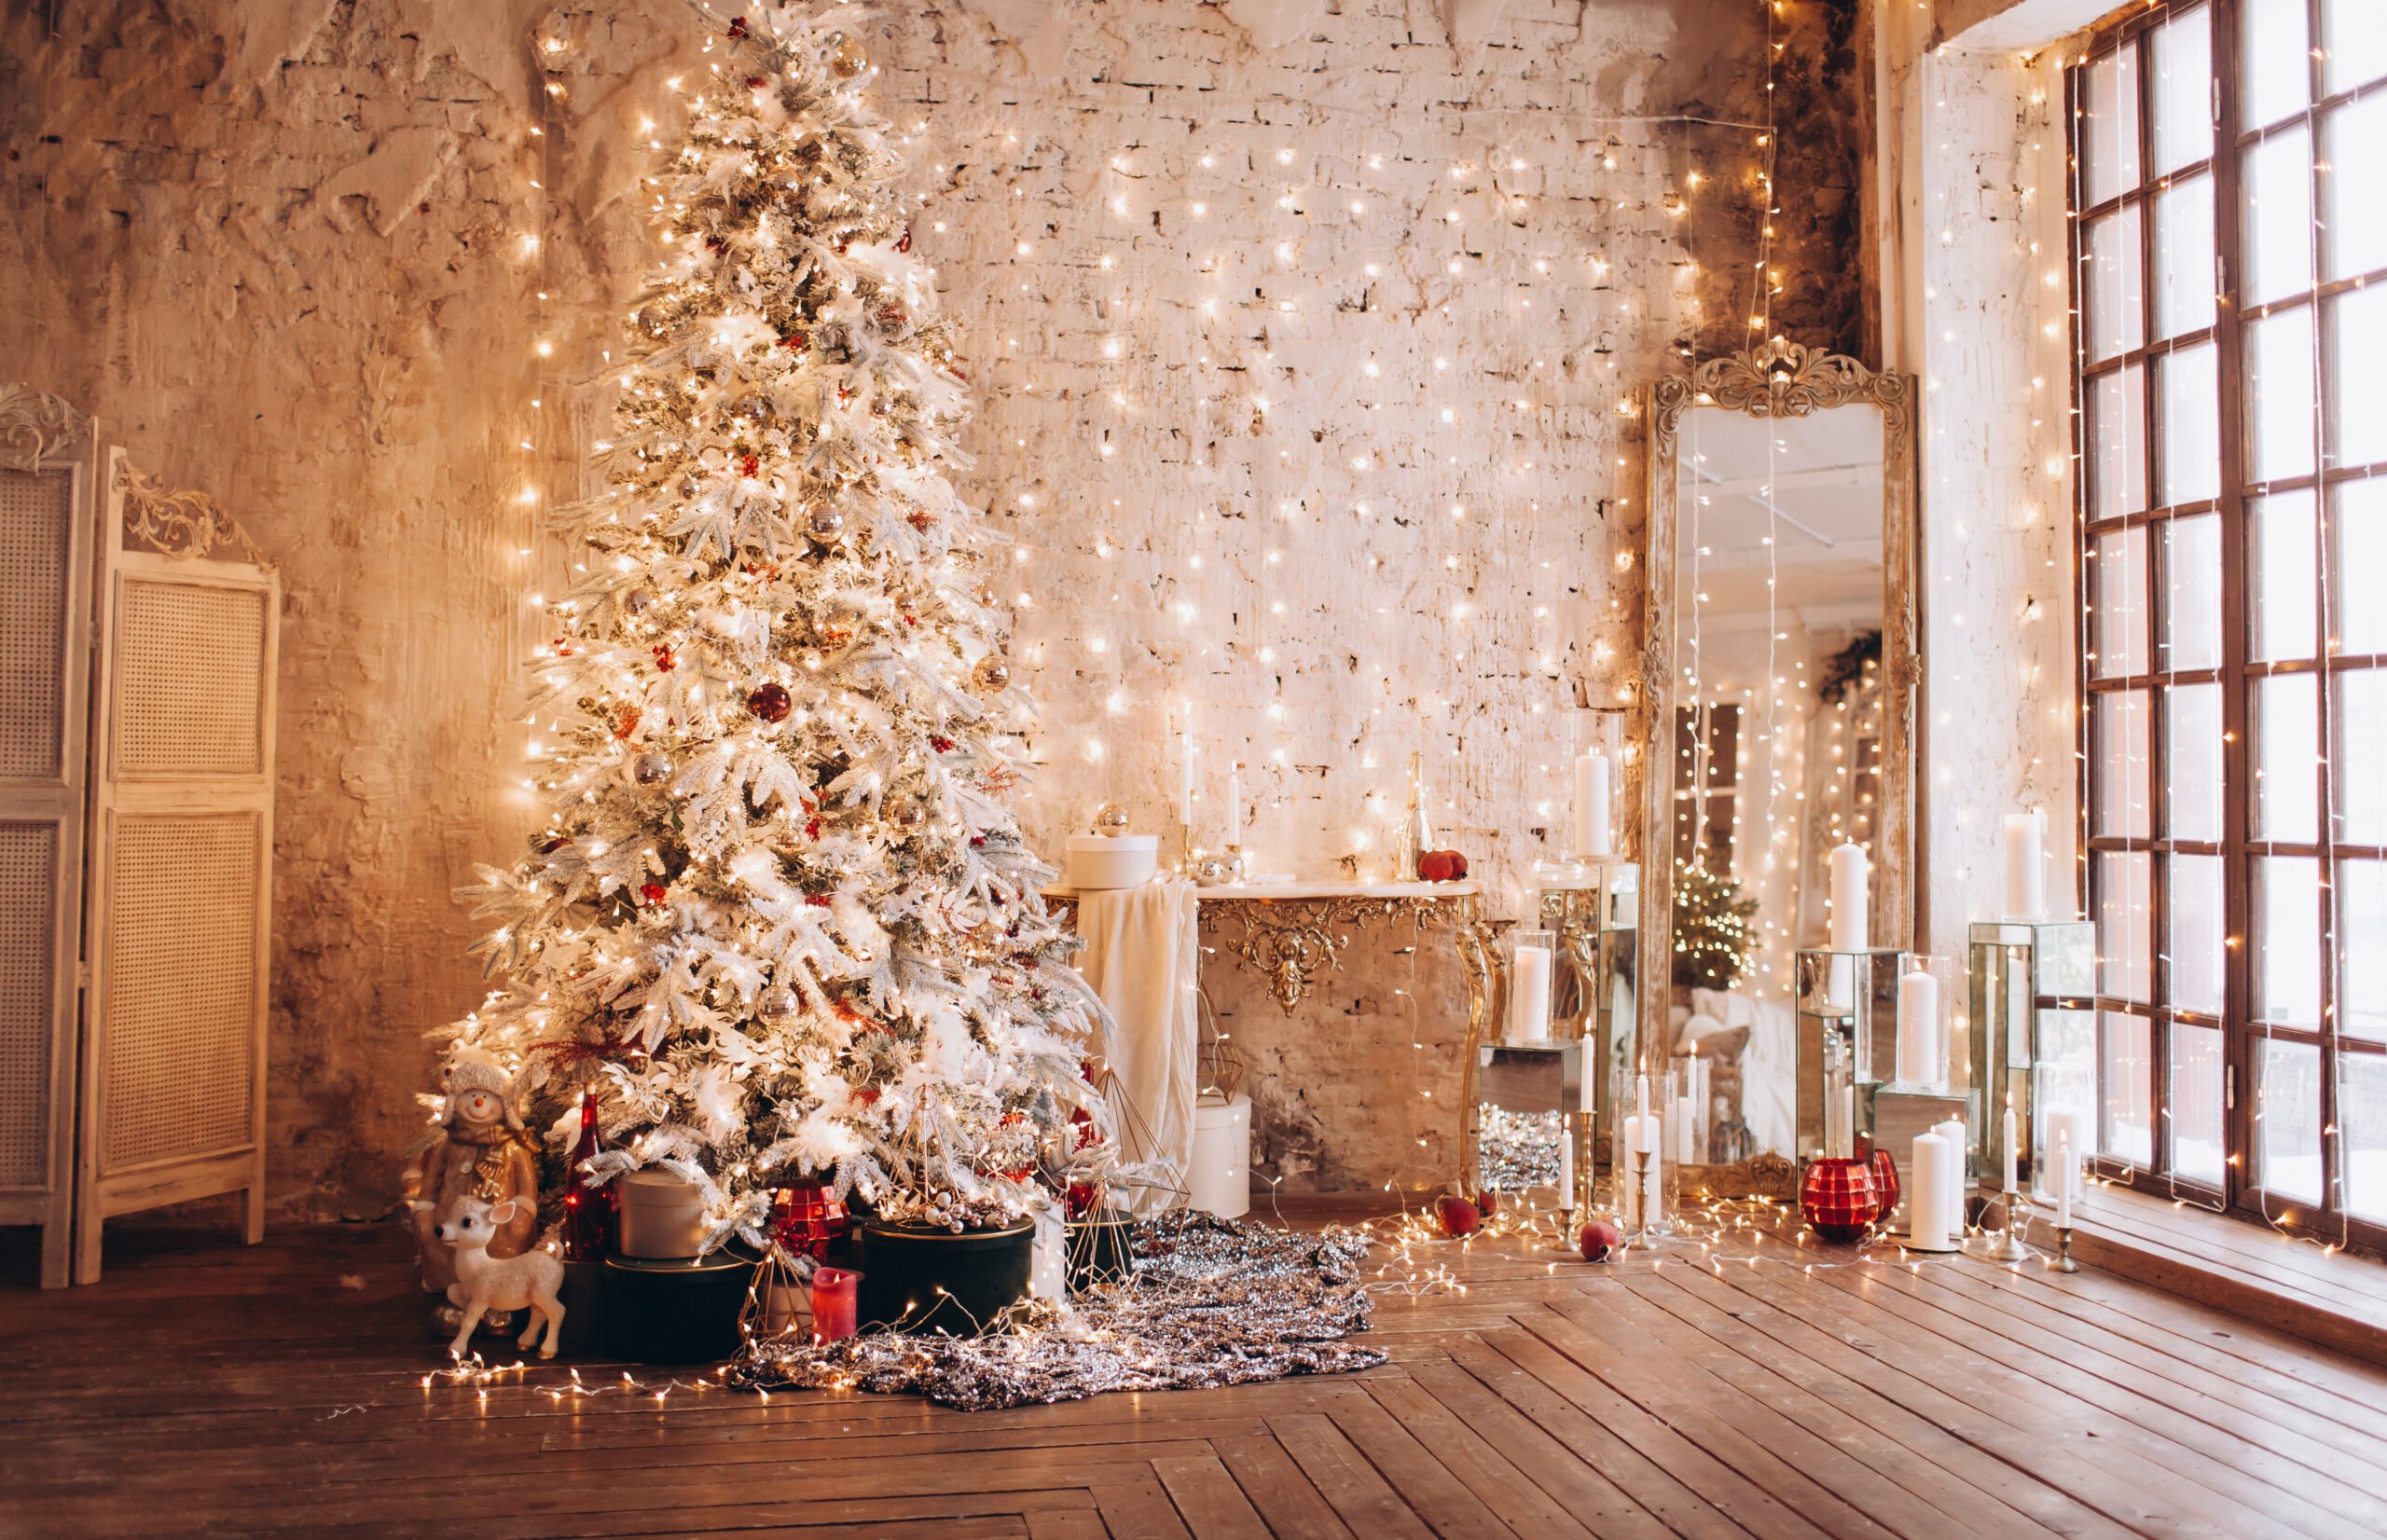 Beautiful Christmas tree and decorated living room with hardwood floors.